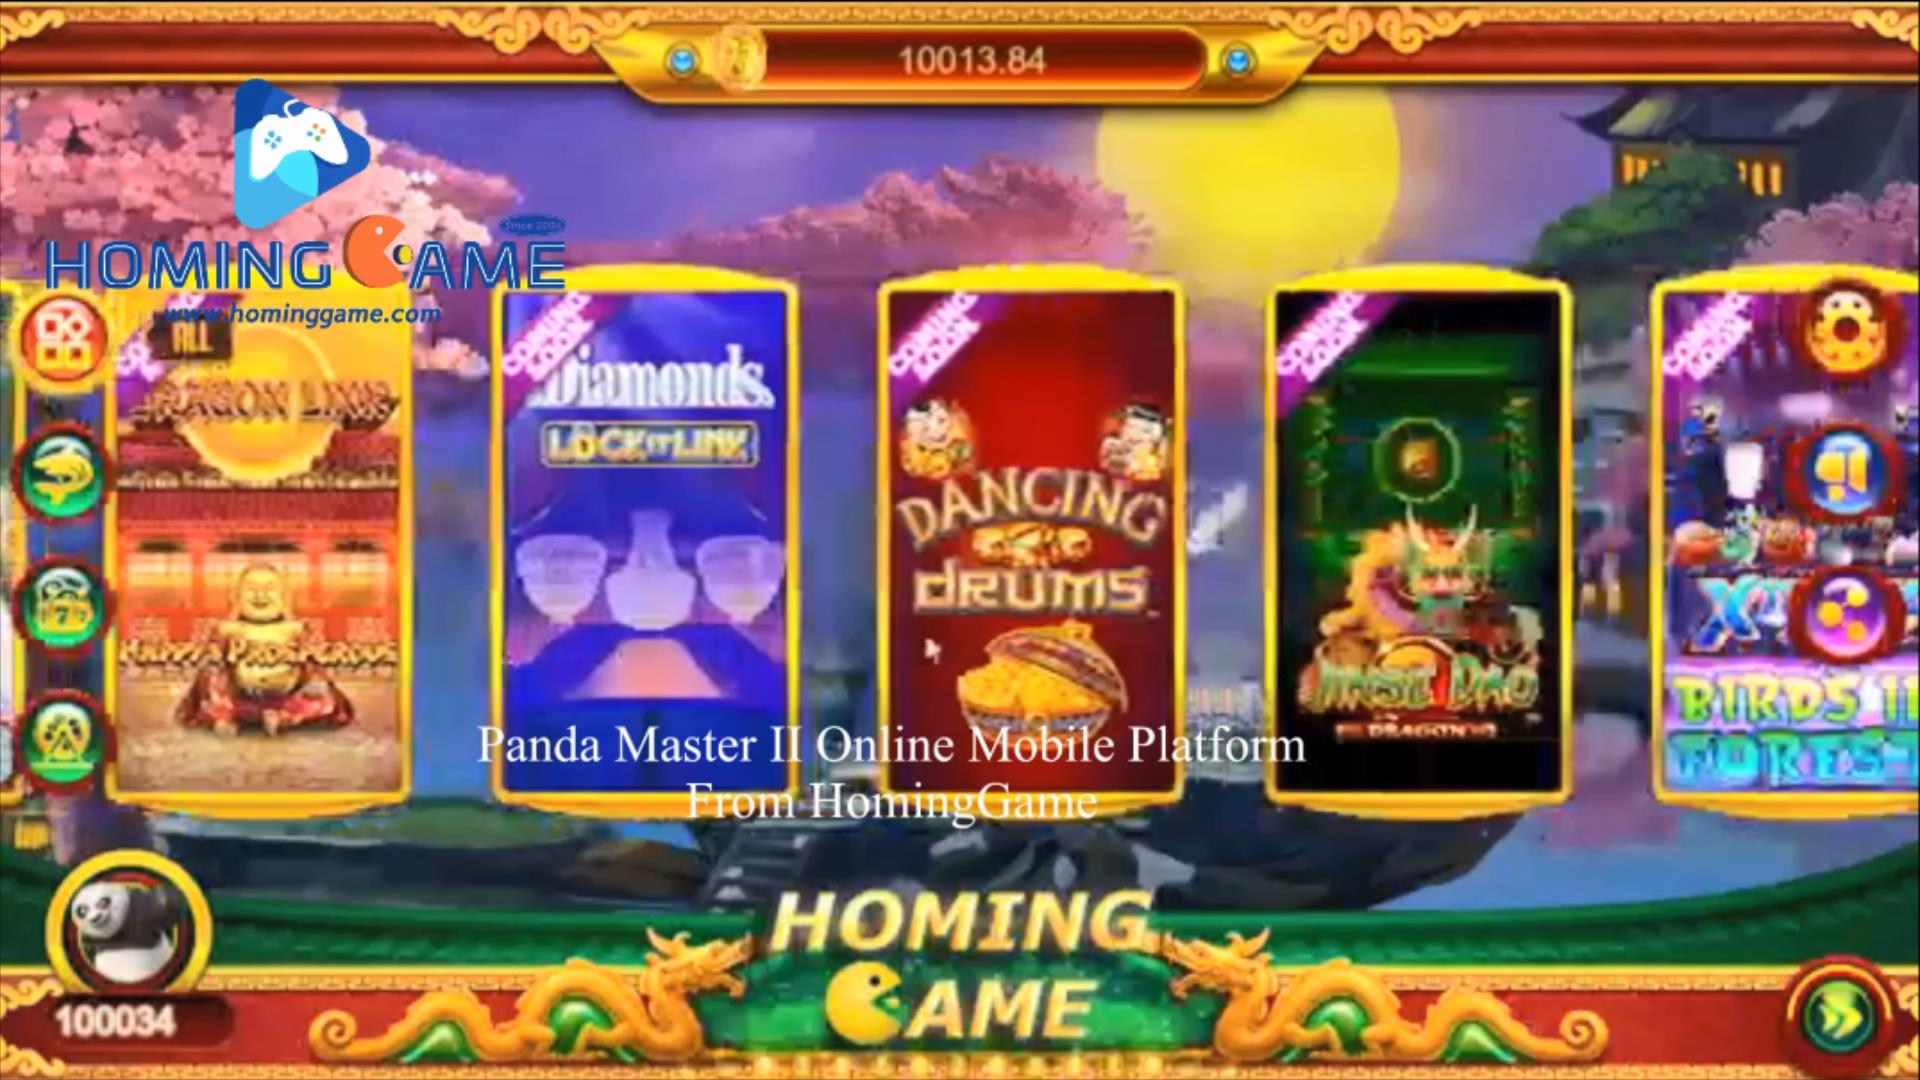 2022 Latest Online Platform HomingGame Panda Master 2 online mobile Gaming Panda Master II Online mobile fishing game(Order call whatsapp:+8618688409495),panda master online game,panda master online mobile game,panda master online mobile game,download panda master online gaming apps,MysteryDragons online gaming,MysteryDragons online slot gaming,online fishing game apps,online slot game apps,online gaming system,usa best online fishing game apps,download online fishing game apps,download online slot game apps,download online gaming system,USA best fishing table game machine supplier and manufacturer by HomingGame Specialize in manufacture fishing Game(Order Call Whatsapp:+8618688409495),fishing game,fishing table,fishing table game machine,fishing game machine,fishing arcade game machine,fish hunter fishing game machine,upright table fishing game machine,standup fishing game machine,ocean king 3 fishing game machine,capatian america fishing game machine,tiger stirke fishing game machine,godzilla fishing game machine,rampage fishing game machine,dragon legend fishing game machine,ocean king,igs fishing game machine,electrical fishing game machine,usa fishing game machine,ocean king 2 fishing gam emachine,fishing game machine supplier,fishing game machine manufacturer,gaming machine,gambling machine,game machine,arcade game machine,coin operated game machine,indoor game machine,electrical game machine,amusement park game equipment,amusement machine,gaming,casino gaming machine,usa fishing game machine supplier,USA fishing table game machine manufacturer,fishing game cheats,fishing game skills,how to paly the fishing game machine,fishing game decoding,fishing game decoder box,hominggame,www.gametube.hk,hominggame fishing game,entertainment game machine,family entertainment game machine,arcade game machine for sale